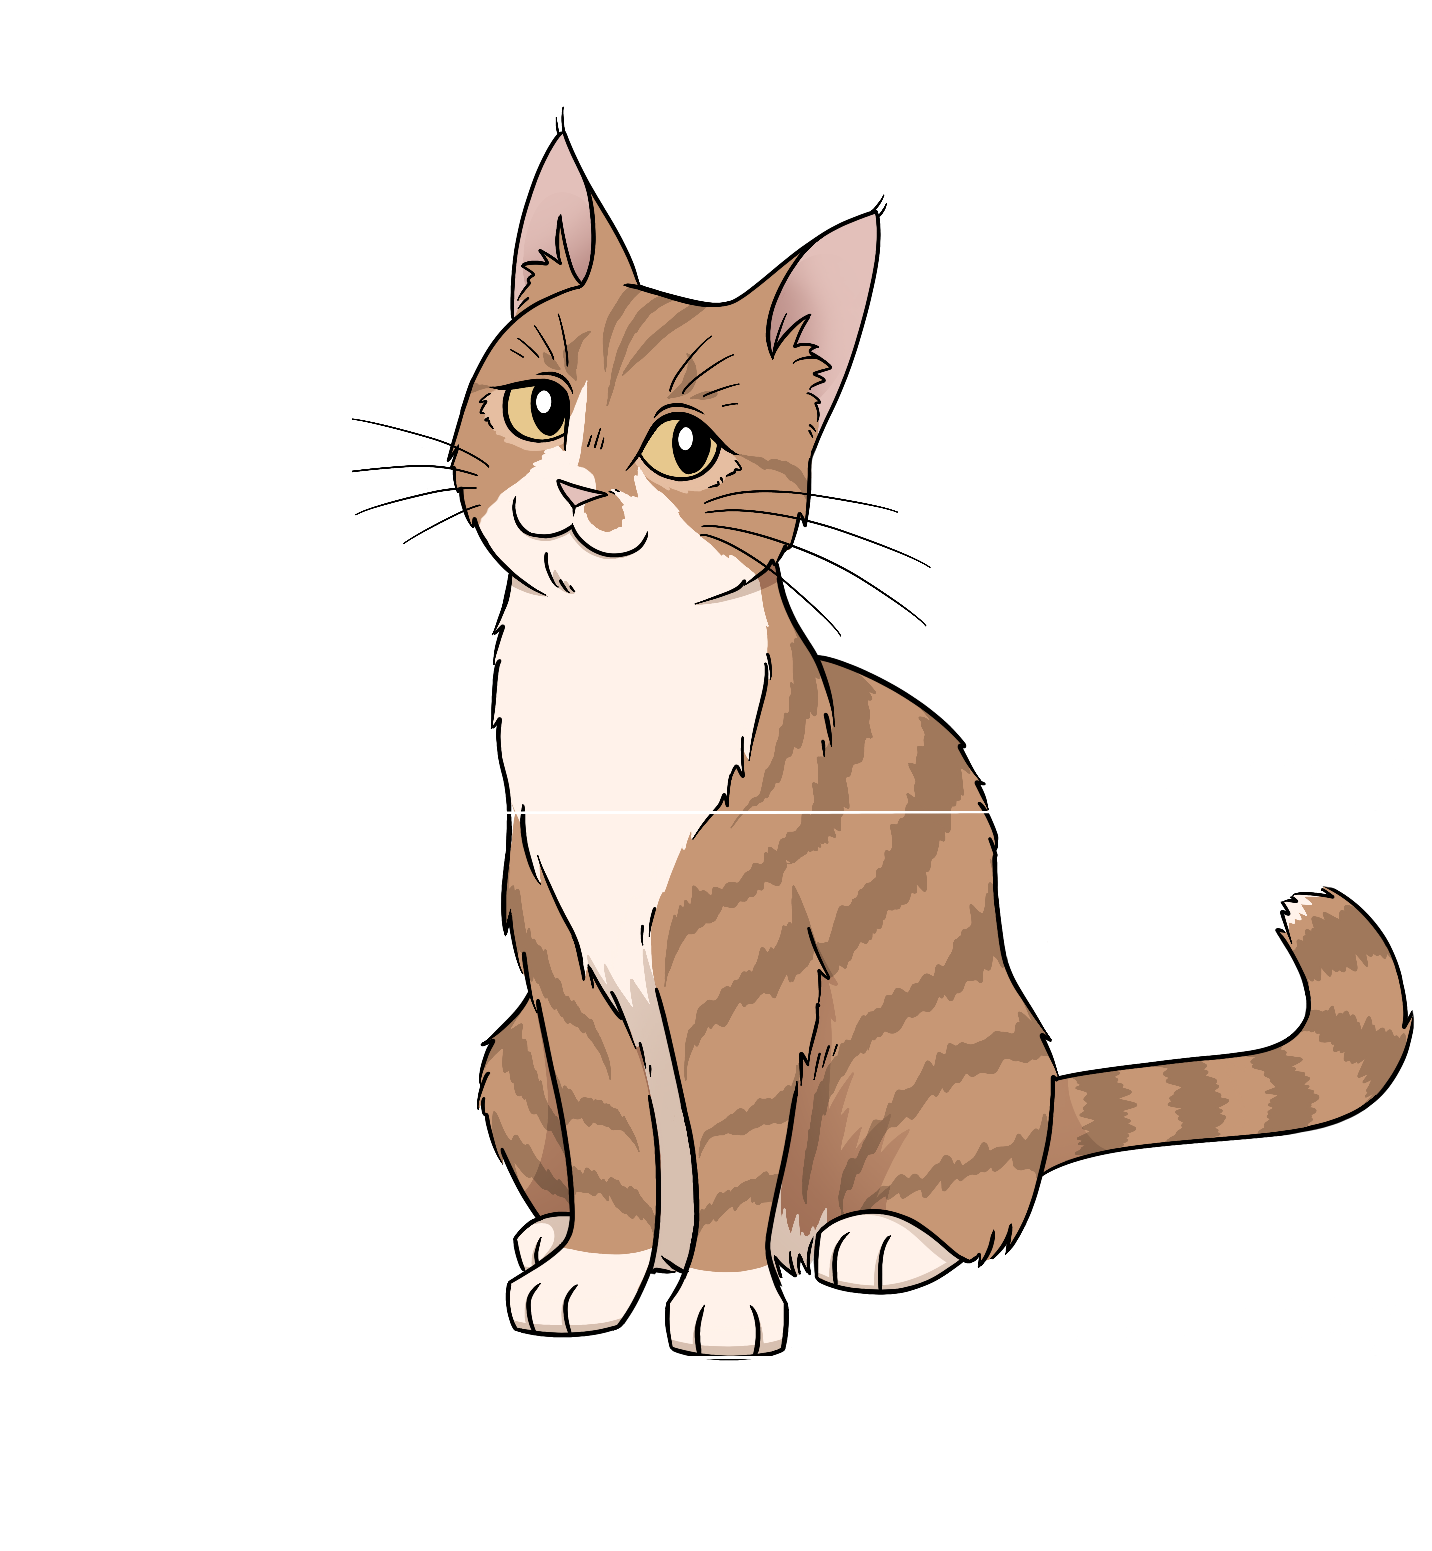 Example of half body and full body portrait of a cat.